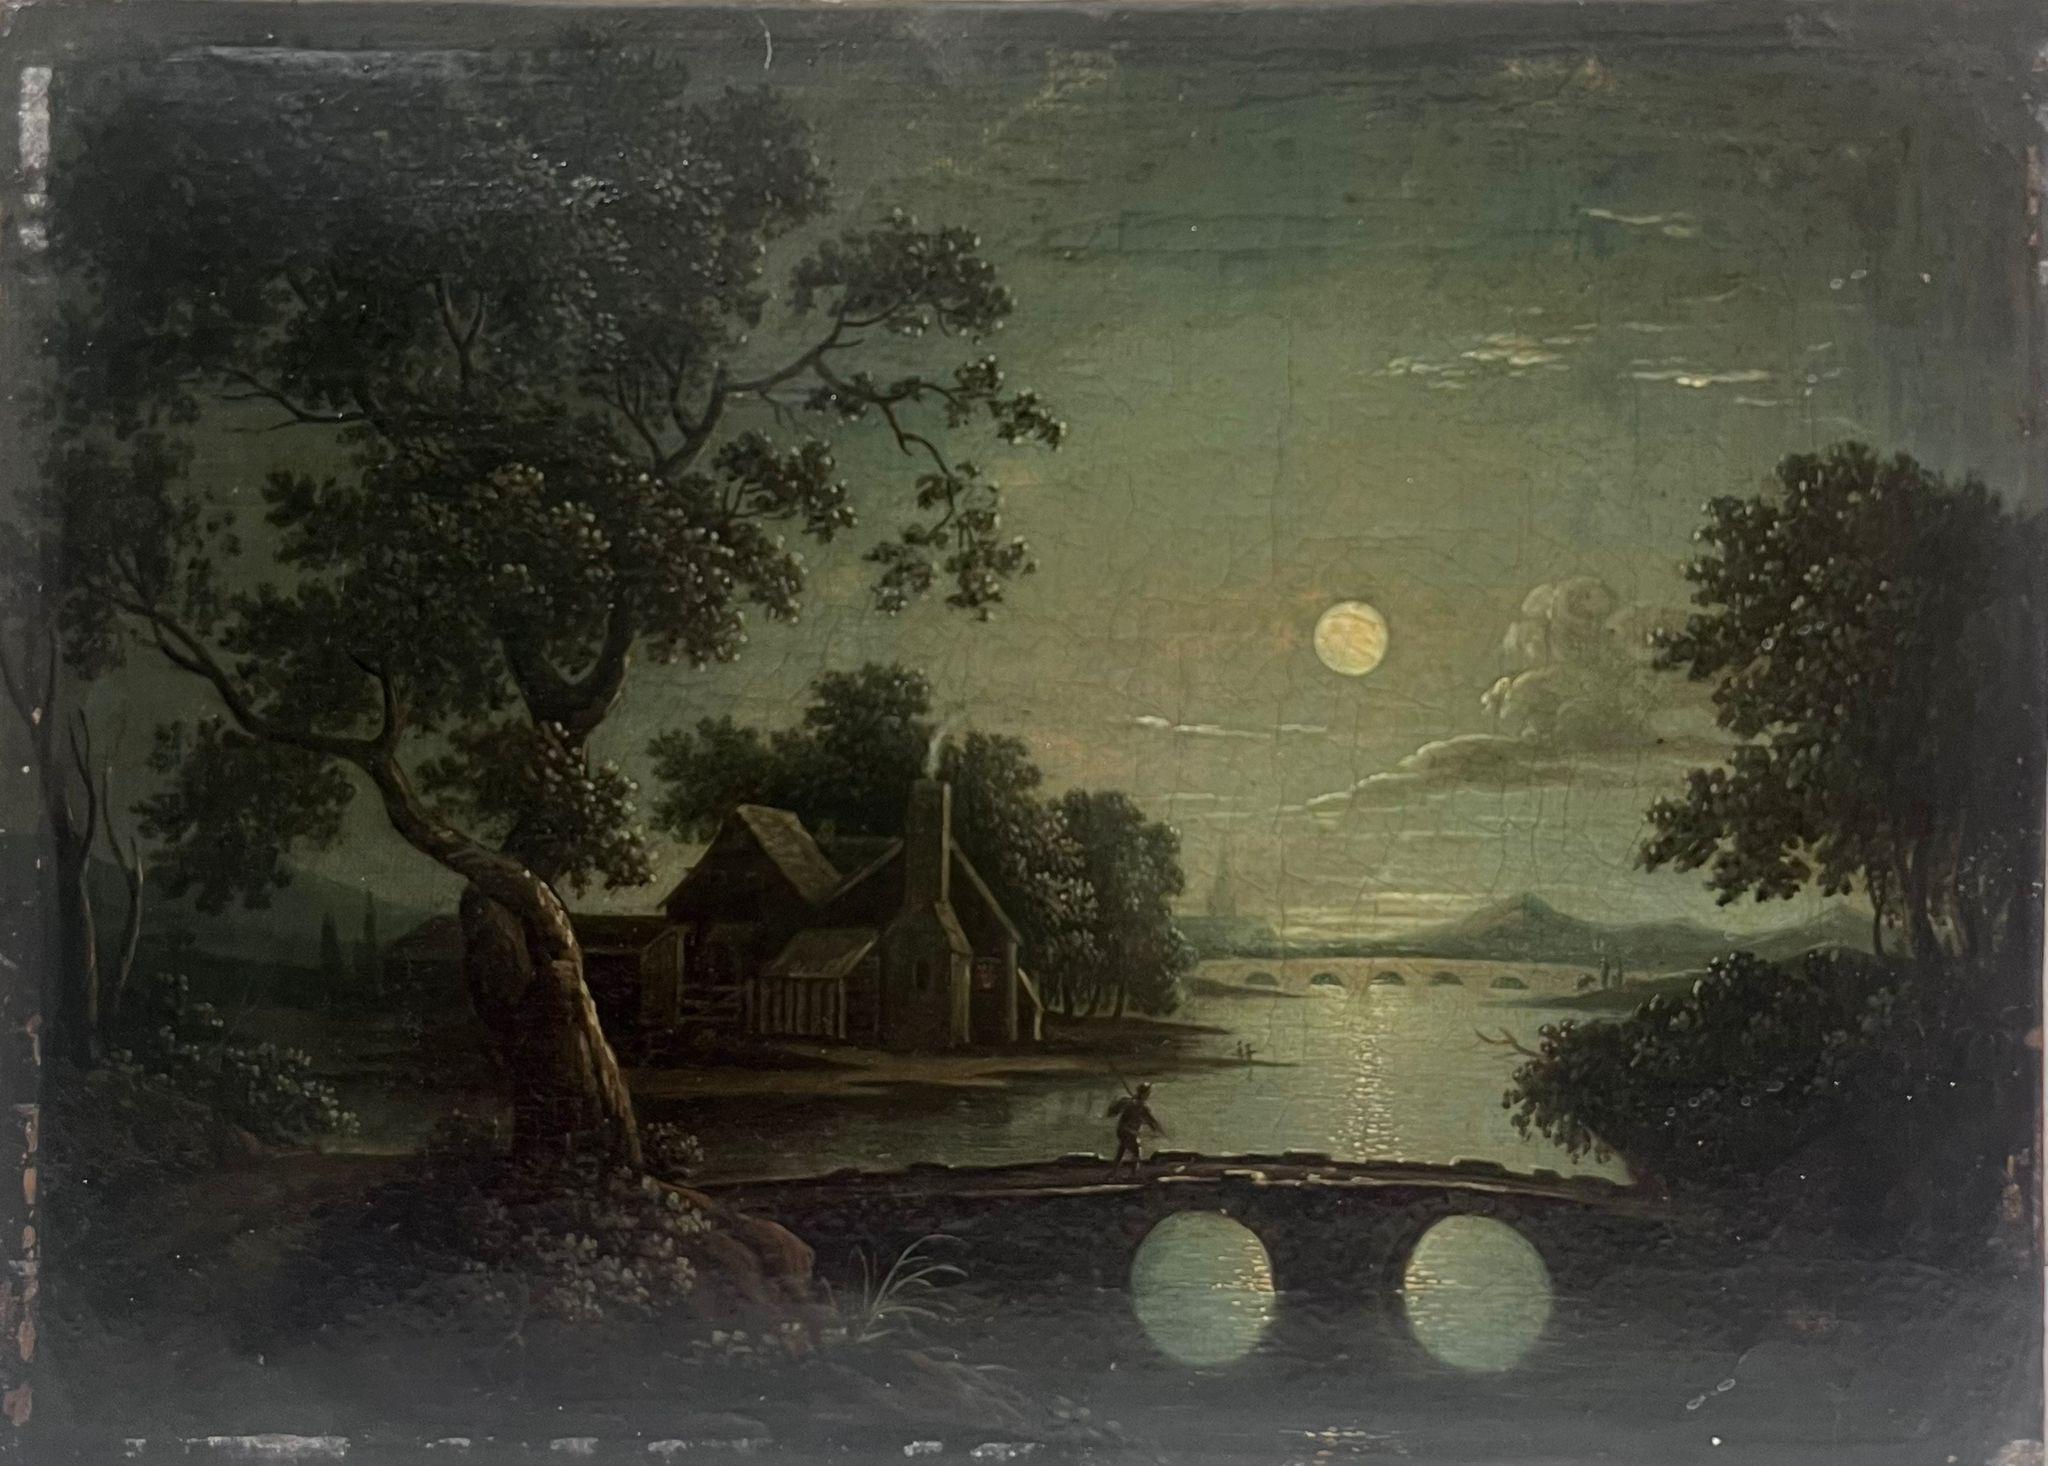 The Moonlit River
English School, early 19th century
circle of Sebastian Pether (1793-1844)
oil on canvas, unframed
canvas: 8 x 11 inches
provenance: private collection, Berkshire, England
condition: very minor surface scuffs but overall in good and